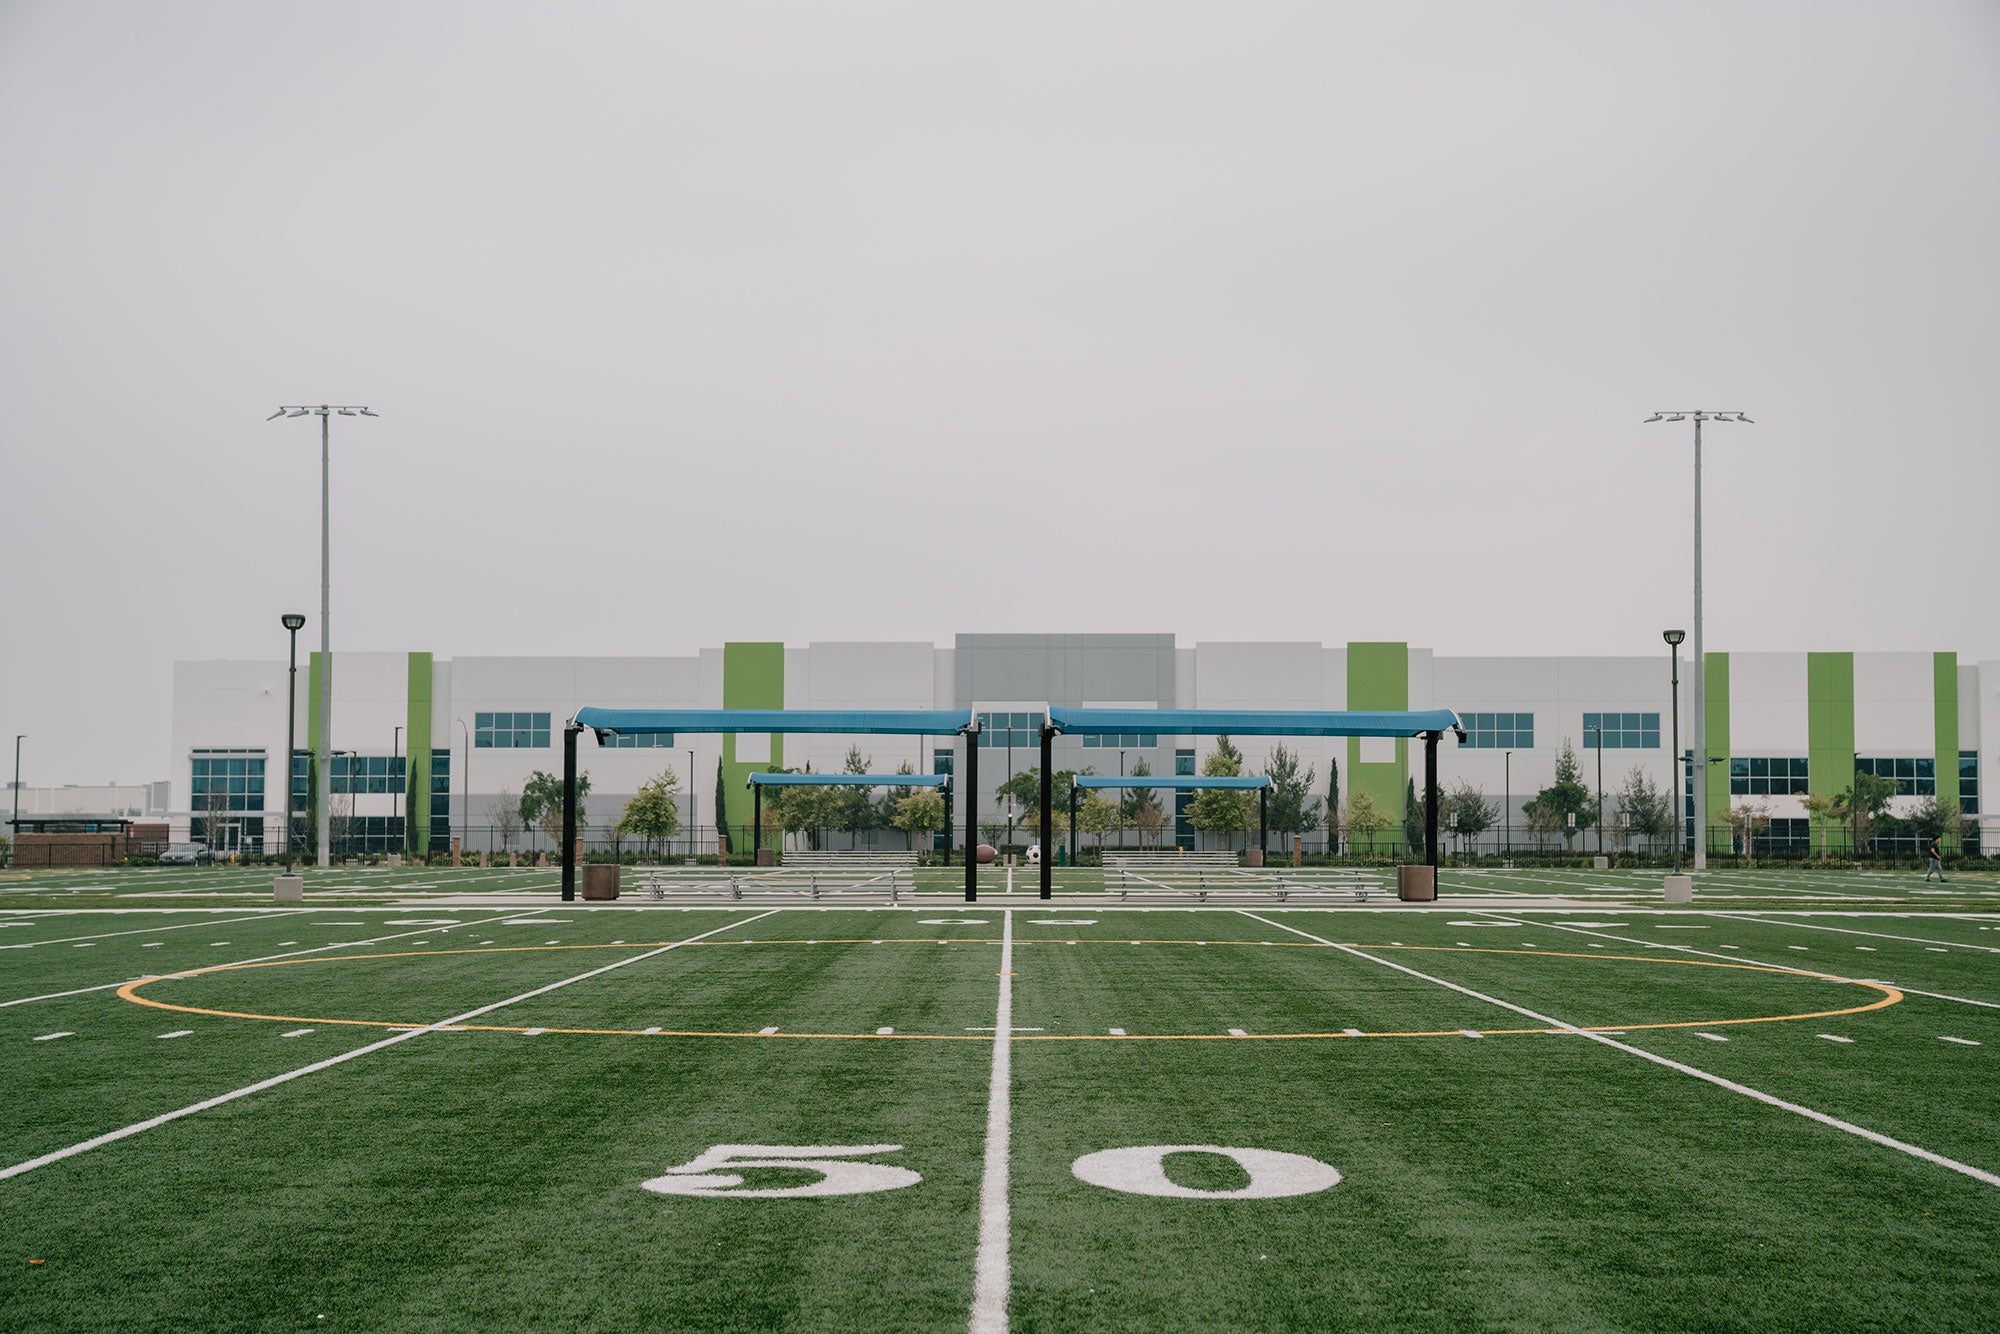 South Fontana Park, a new park in Fontana, Calif., constructed in a residential area surrounded by new warehouses.